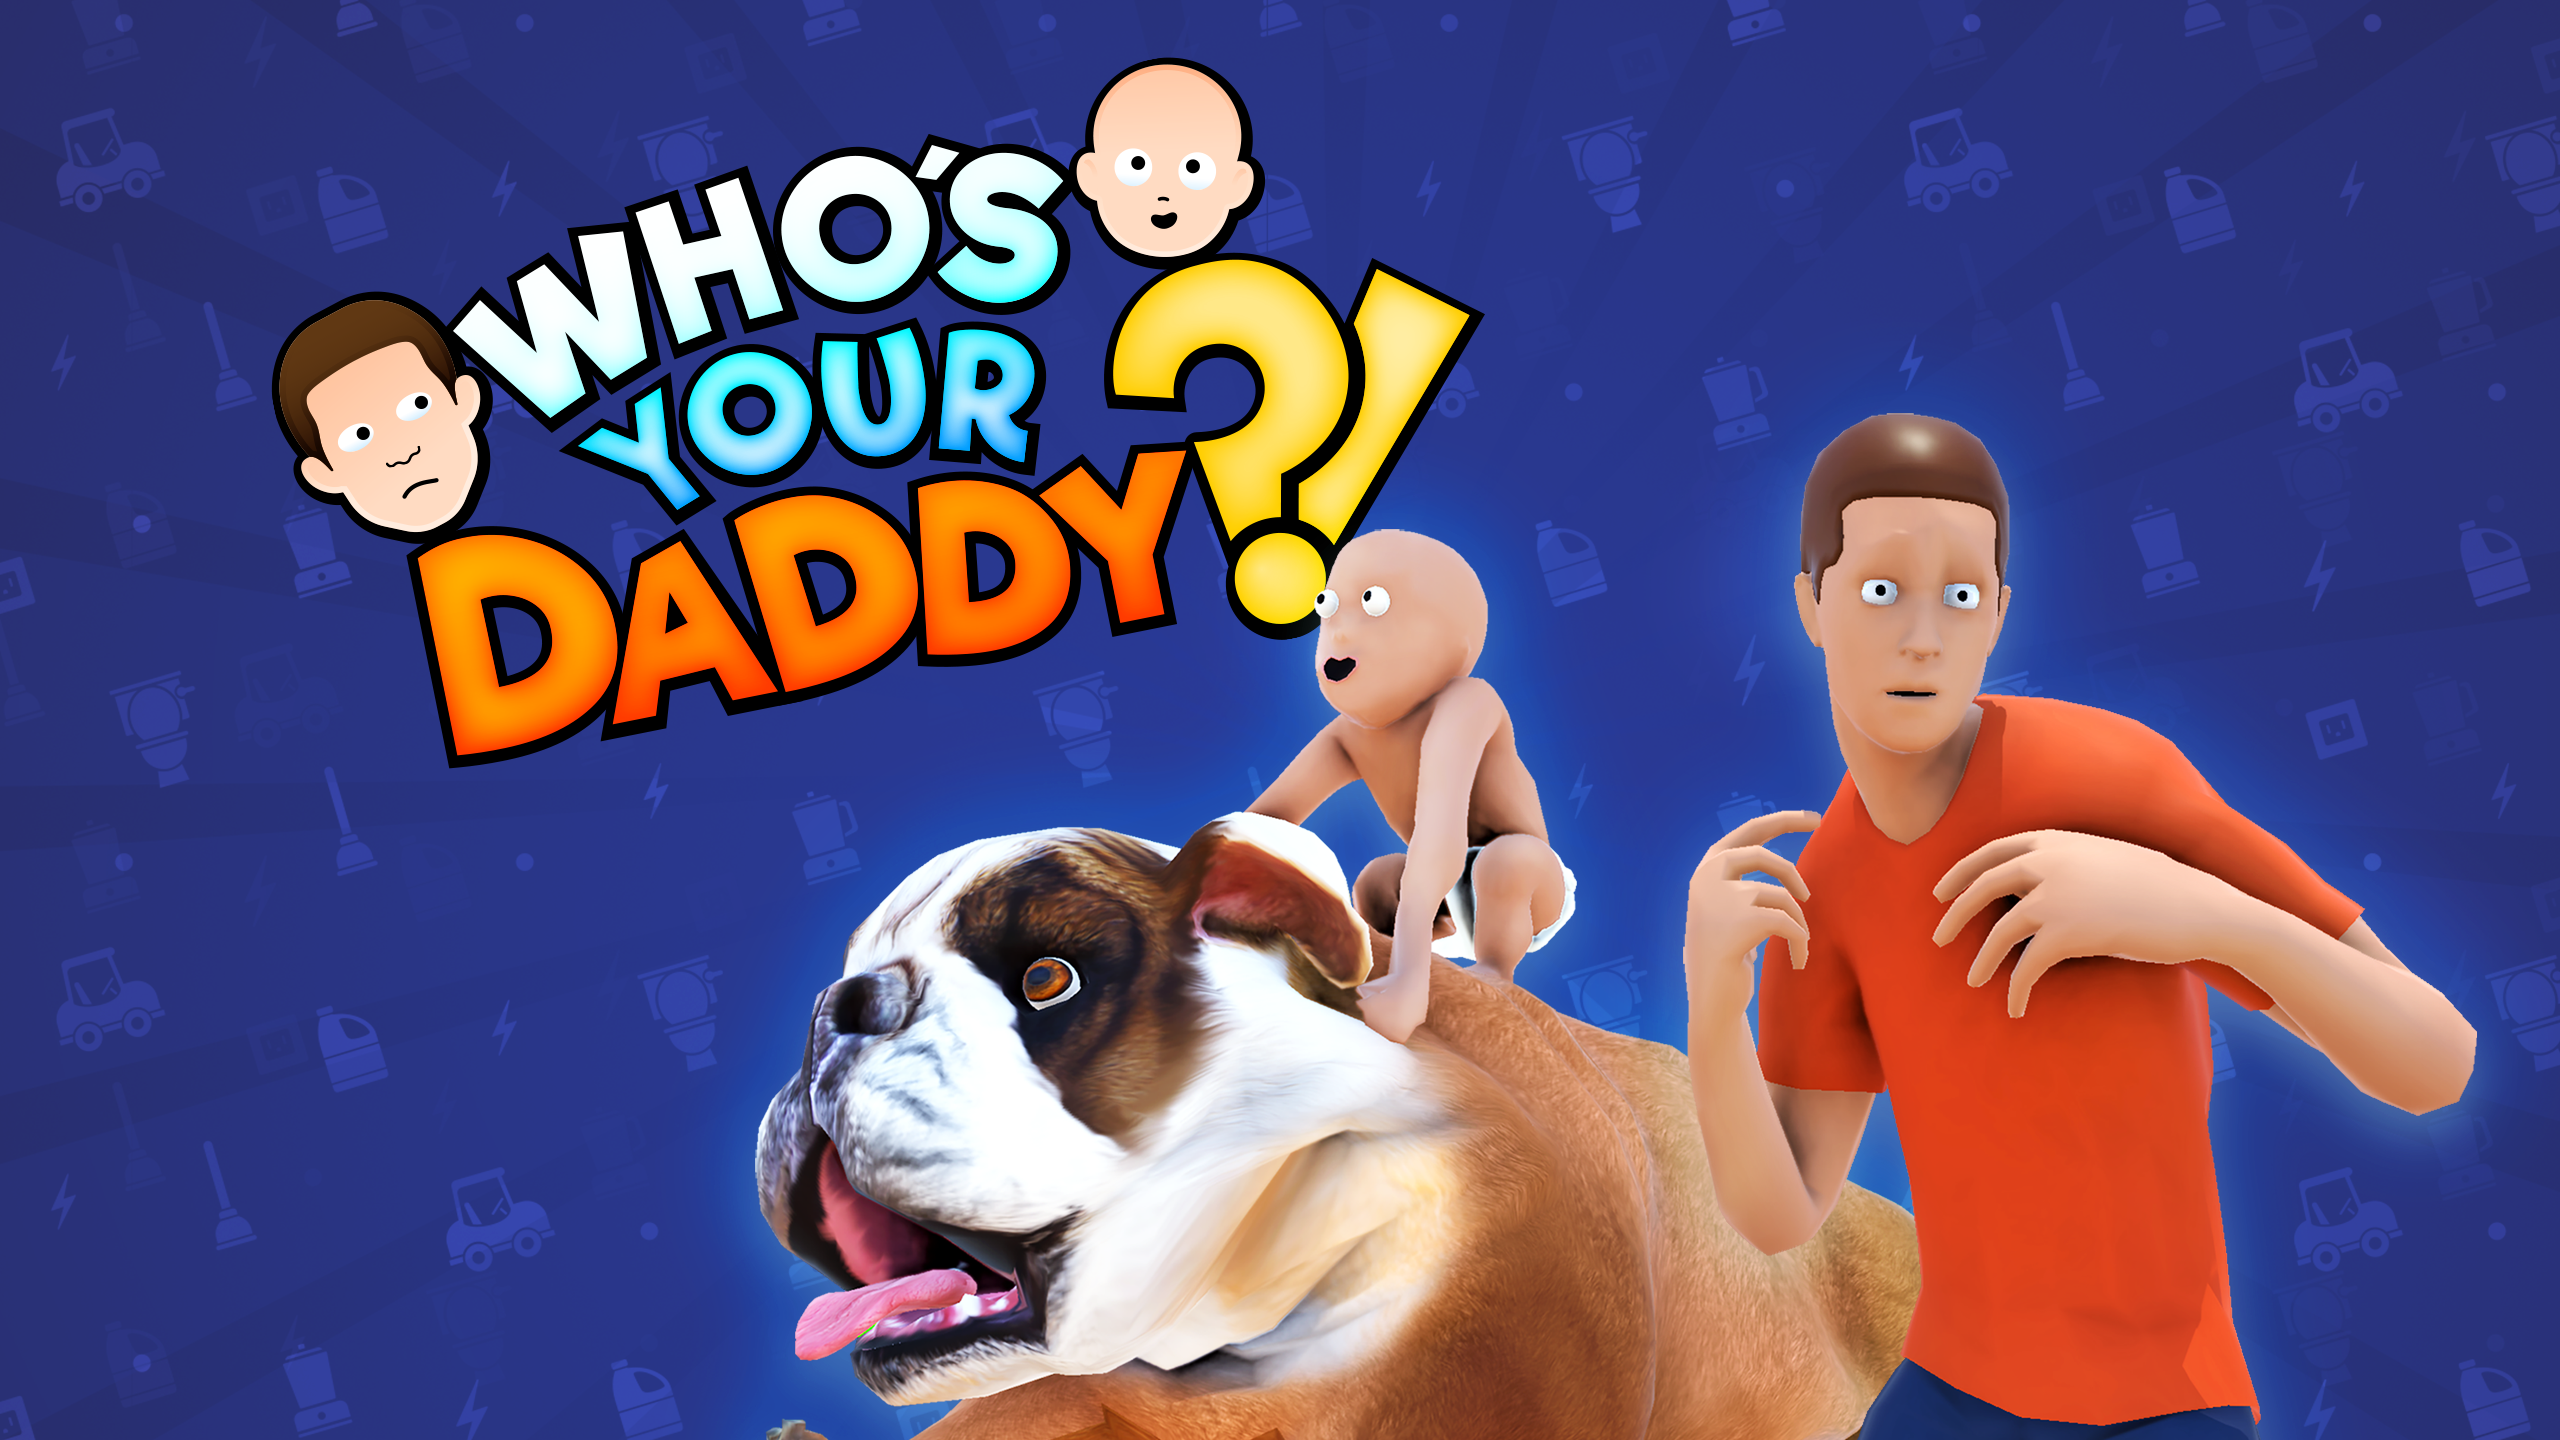 christy chamberlin recommends whos your daddy vr pic